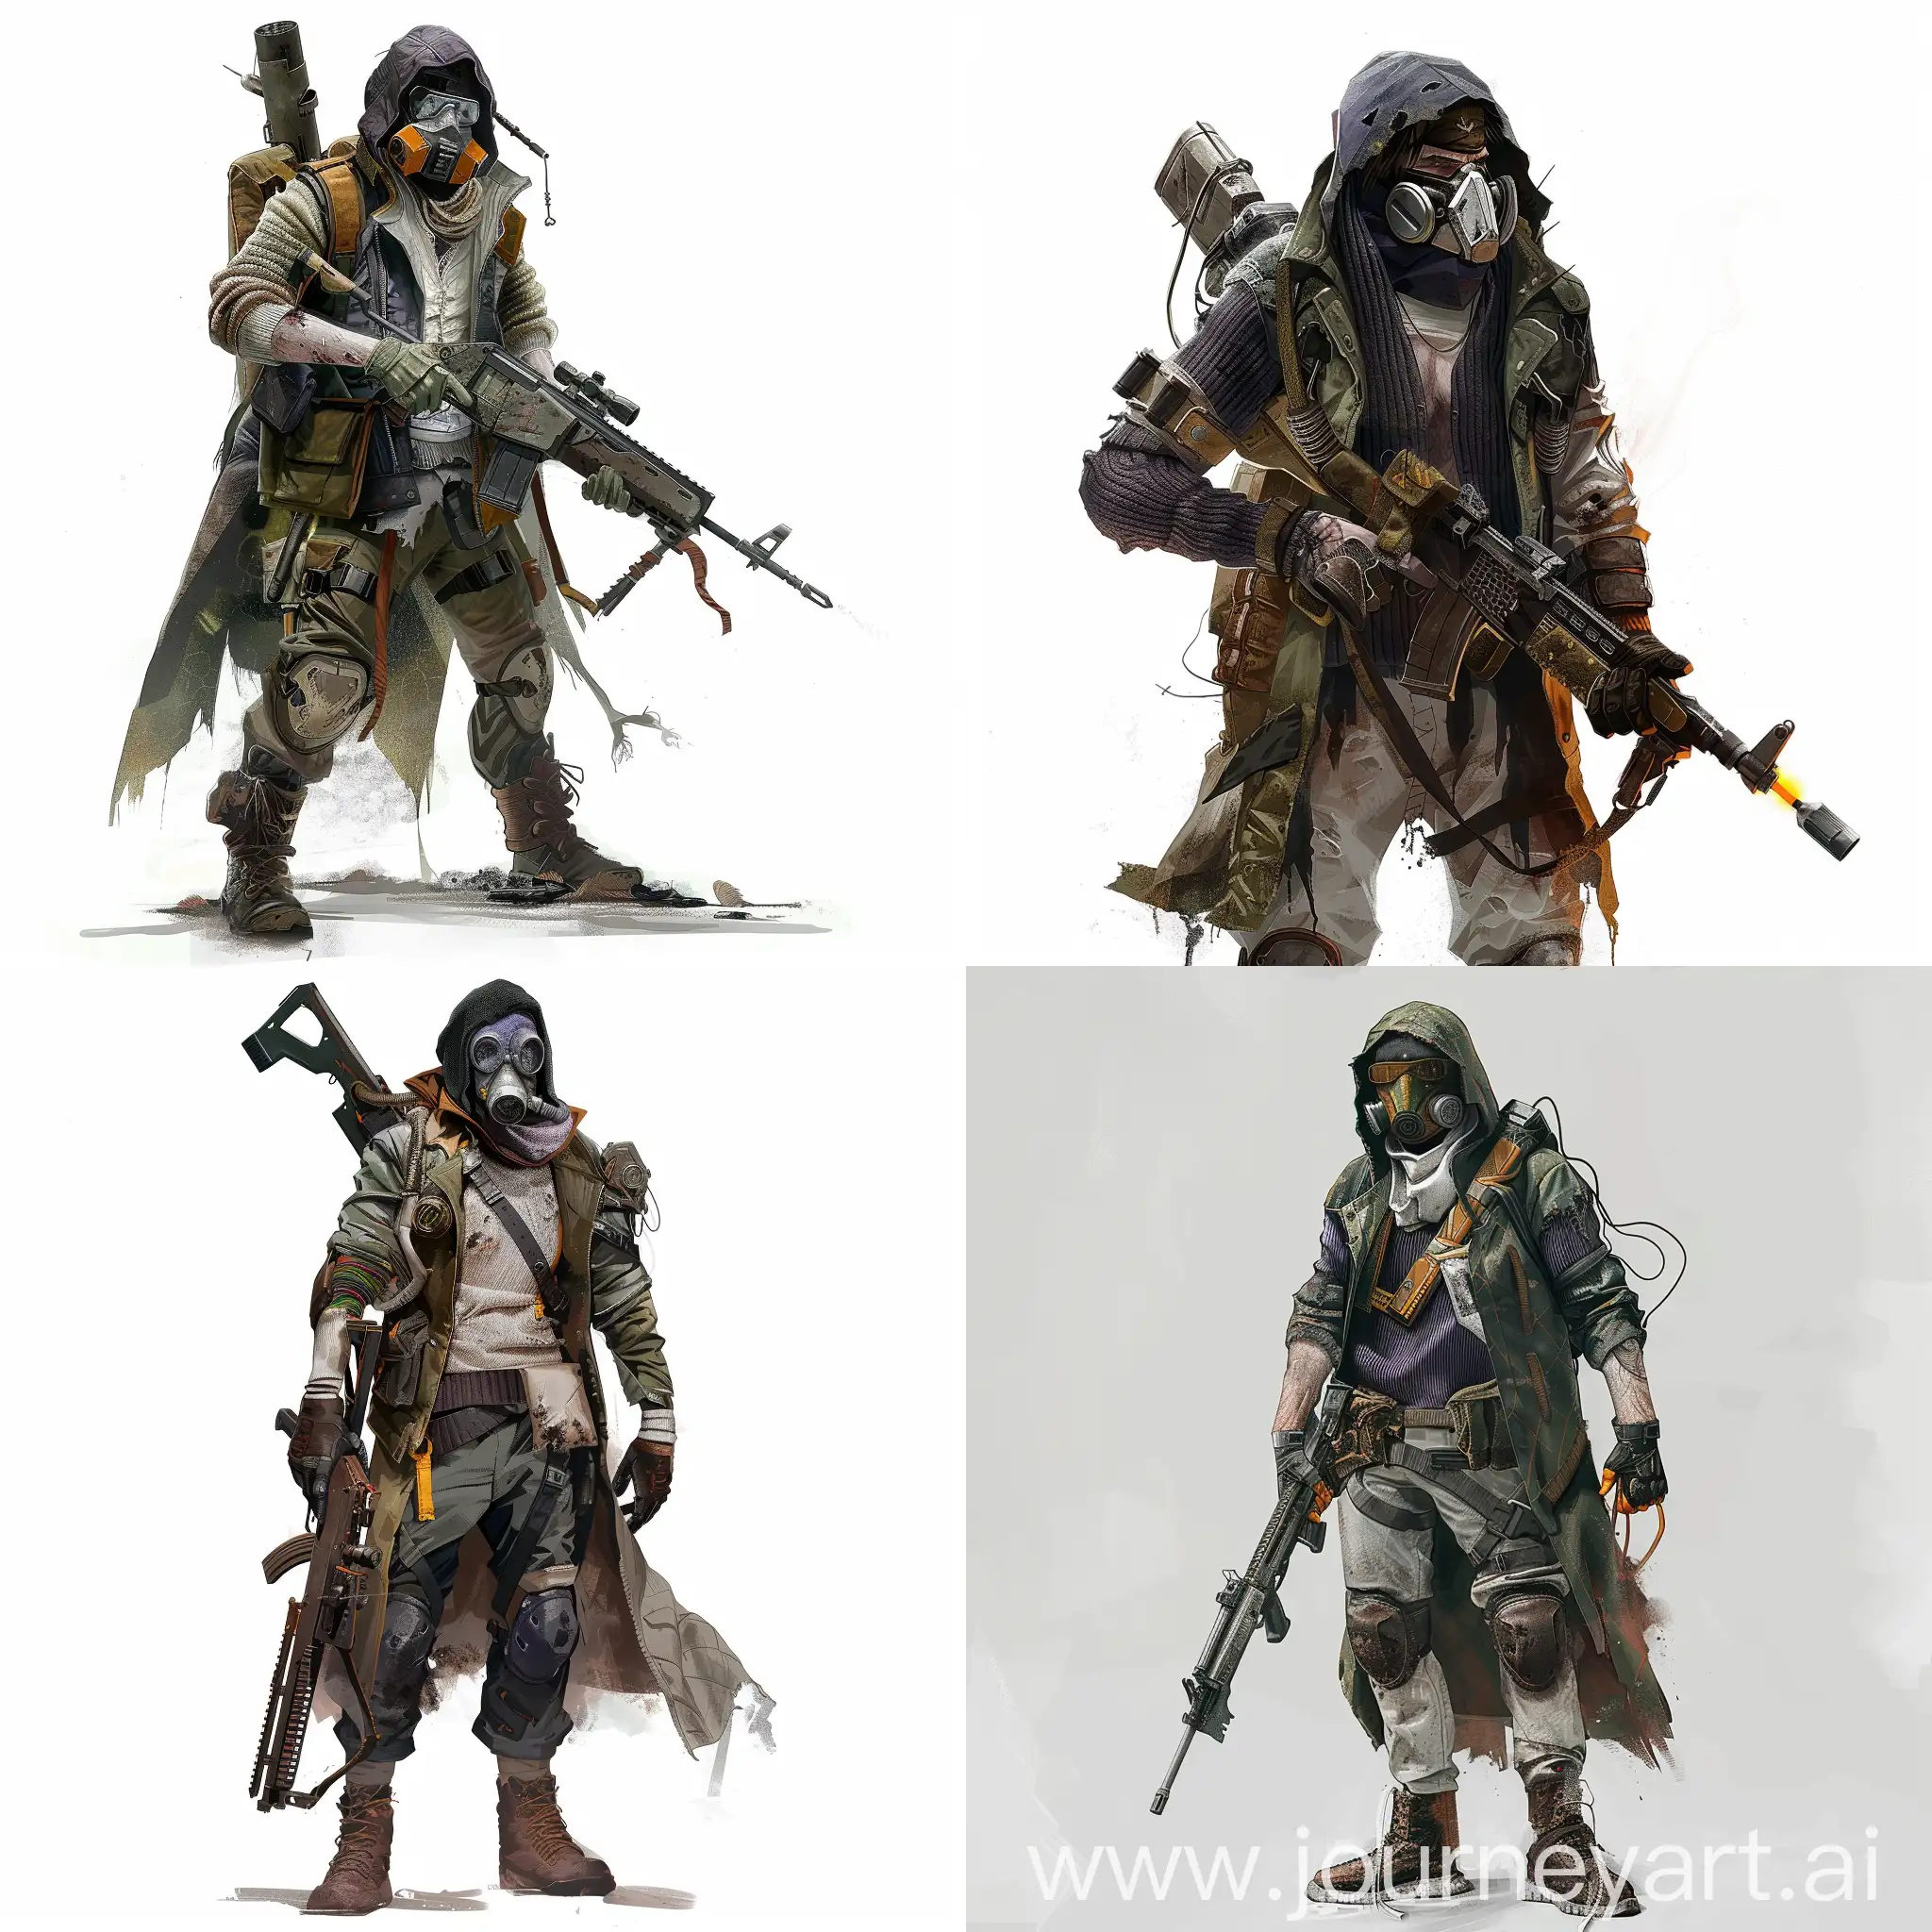 make concept art on a white background of survivor from the Metro 2033 universe, the stalker is a hunter in a sweater over which he wears a torn leather raincoat, a respirator on his face, a sniper rifle in his hands.